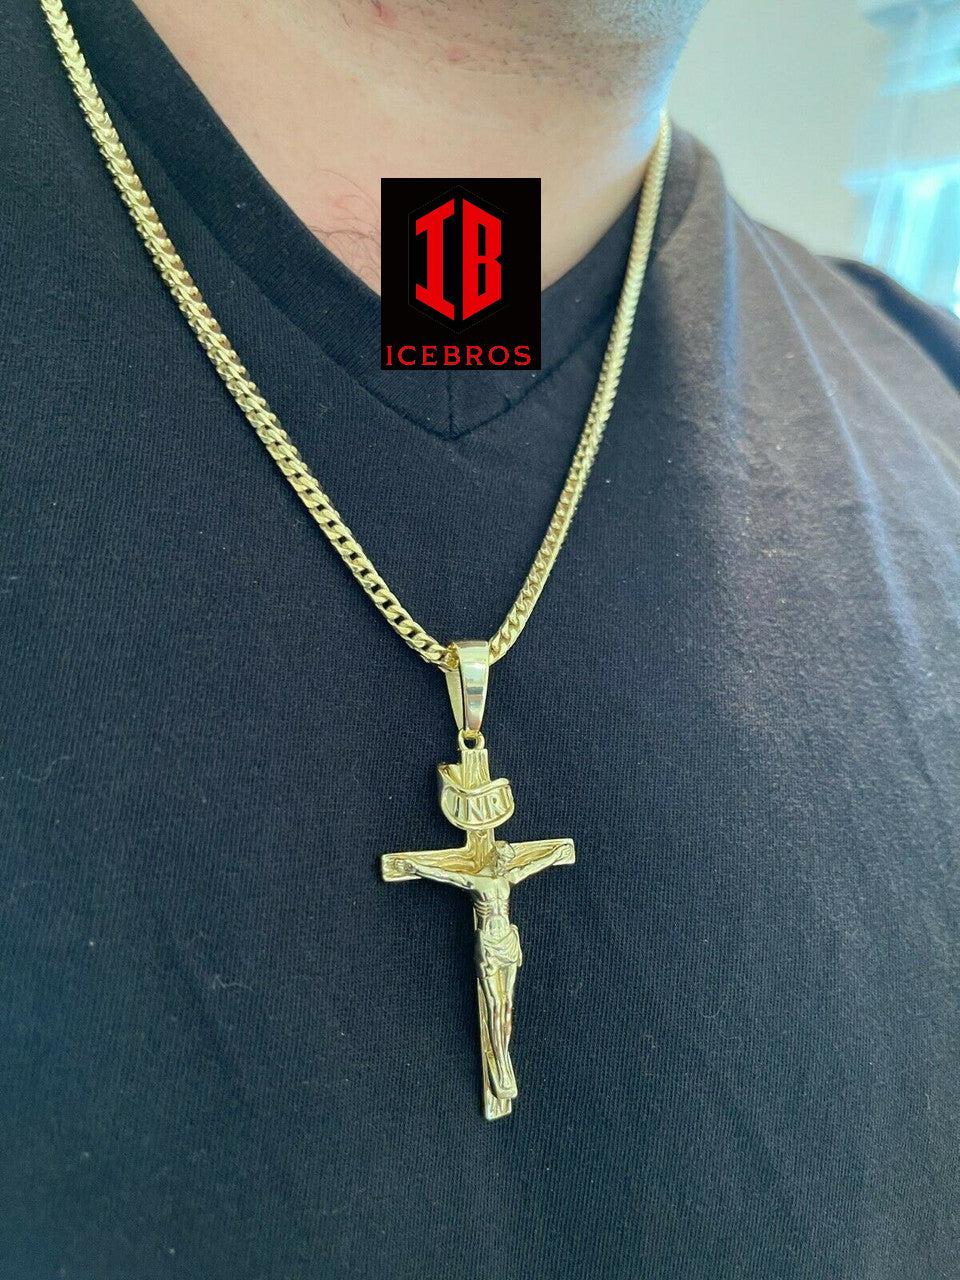 14KT Gold Over Solid 925 Silver Cross Jesus Piece Crucifix Charm Necklace